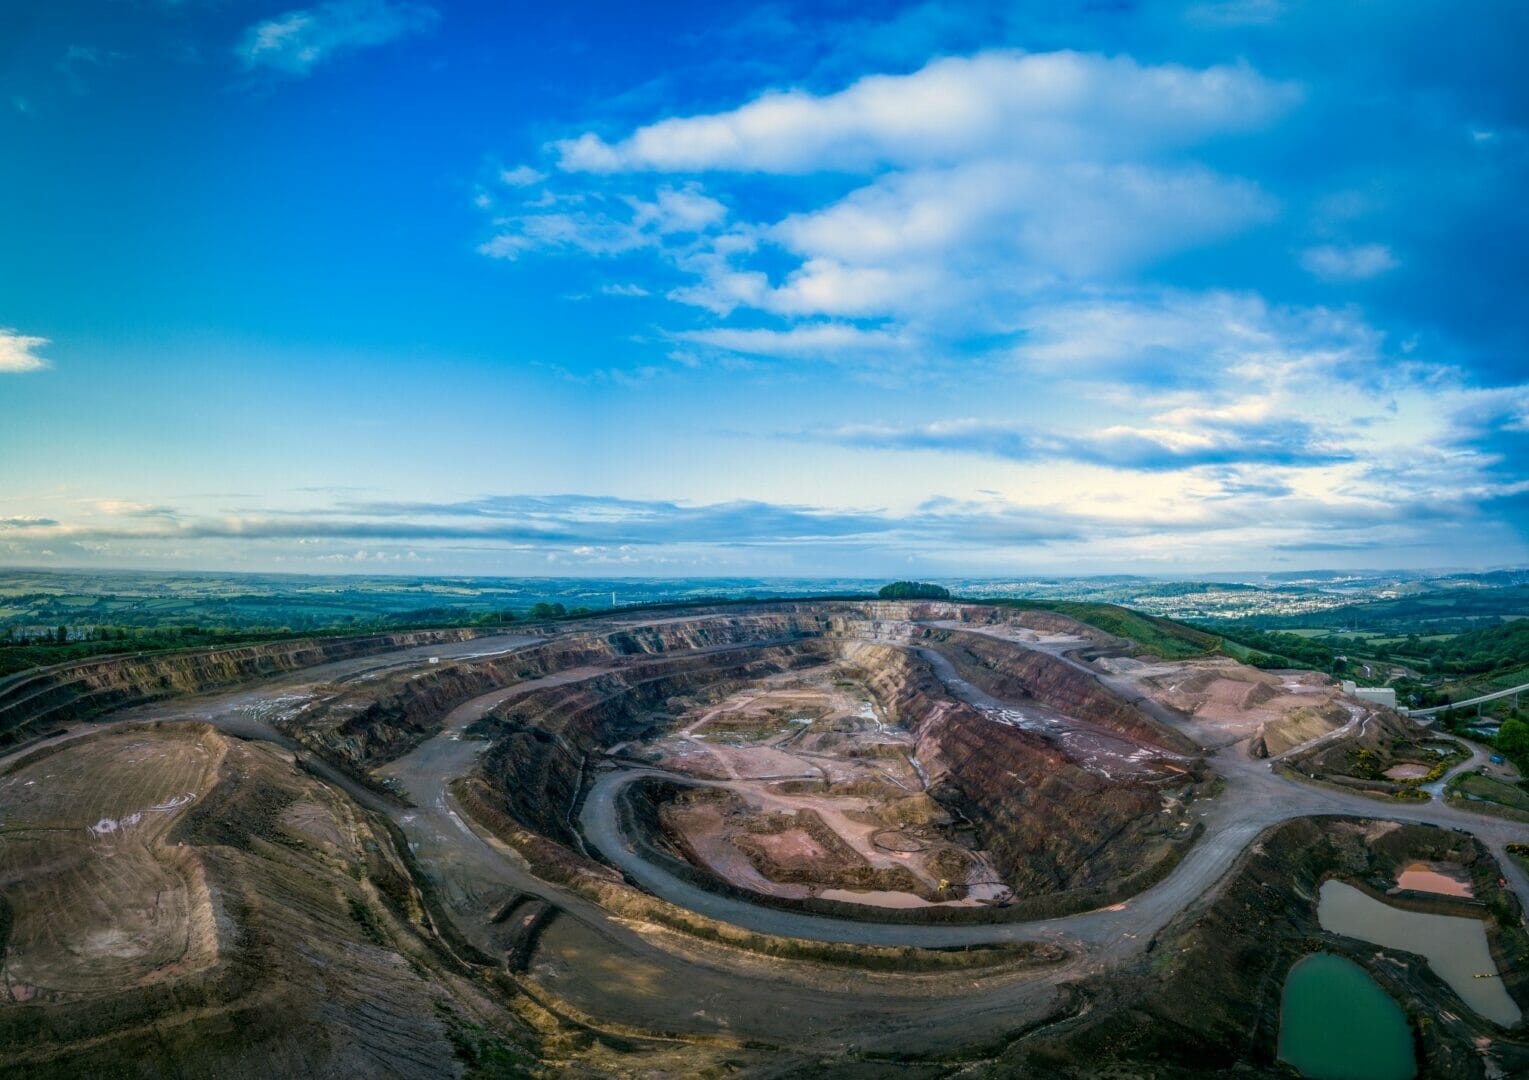 GRS AND TUNGSTEN WEST TO USE MINE WASTE AS SUSTAINABLE AGGREGATE